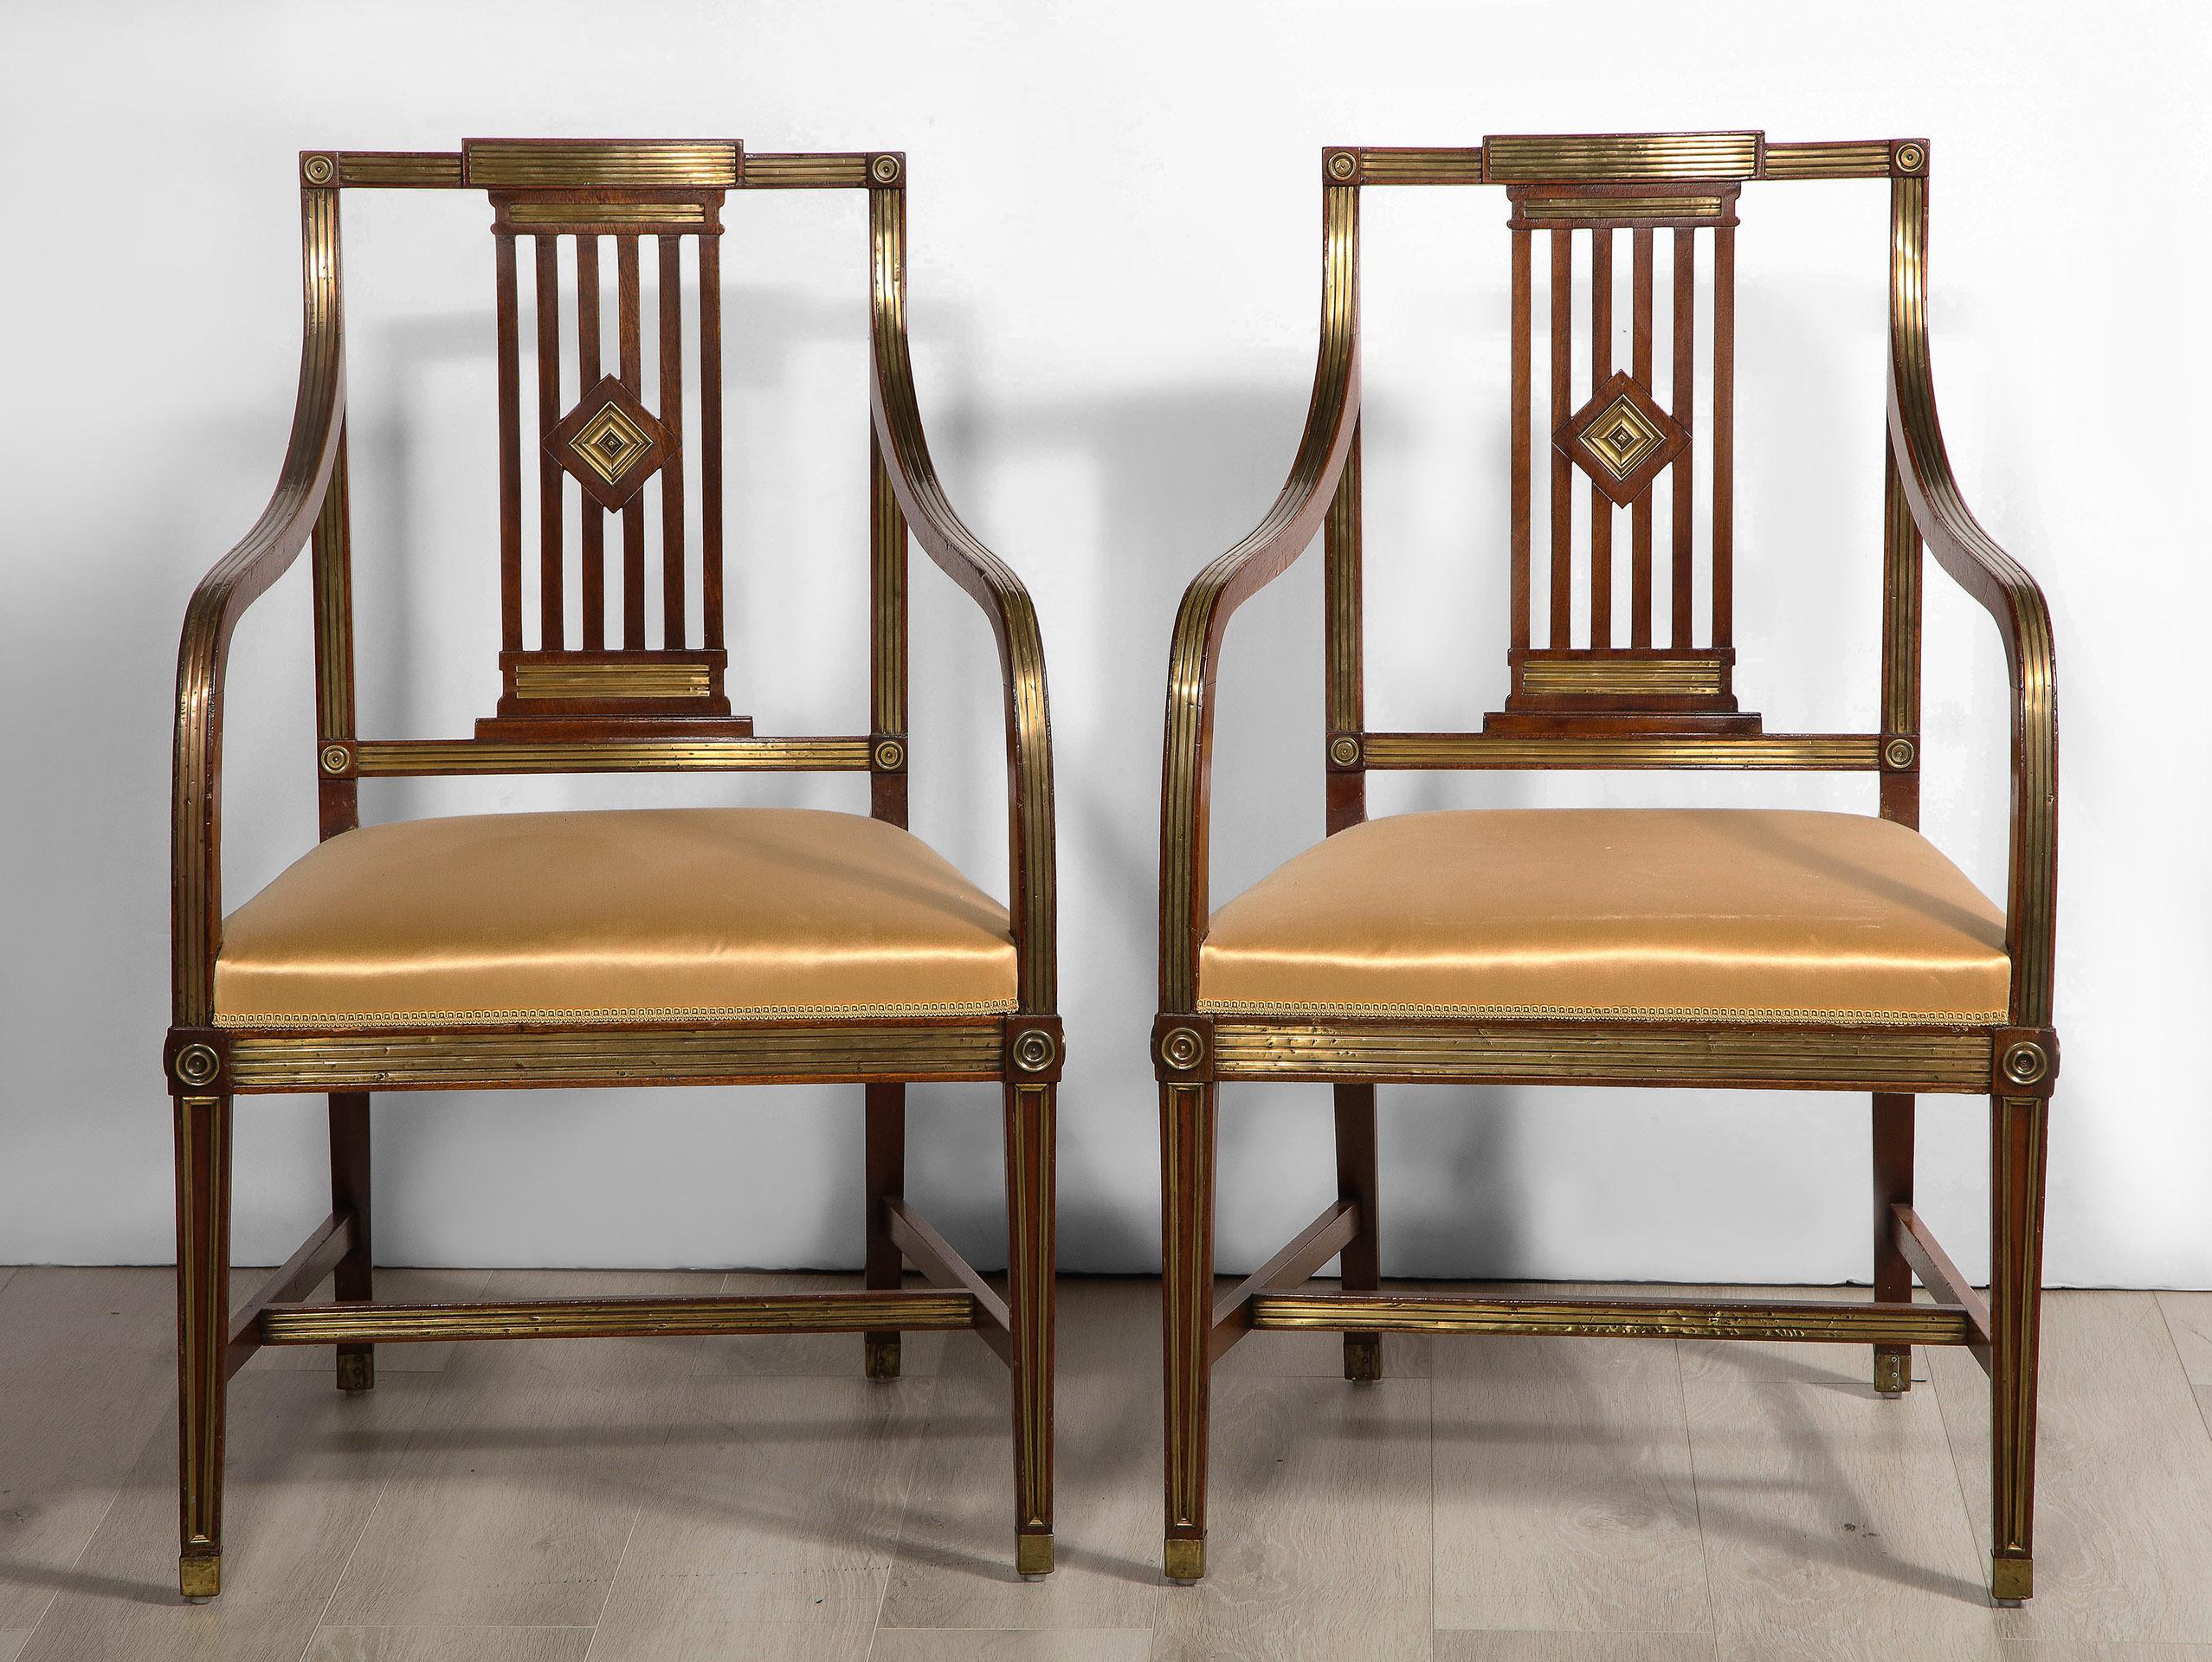 Each Russian neoclassical mahogany arm chair with an open fretwork back, having arms extending out and curving down to an upholstered seat over tapered legs with stretcher. The whole brass mounted.